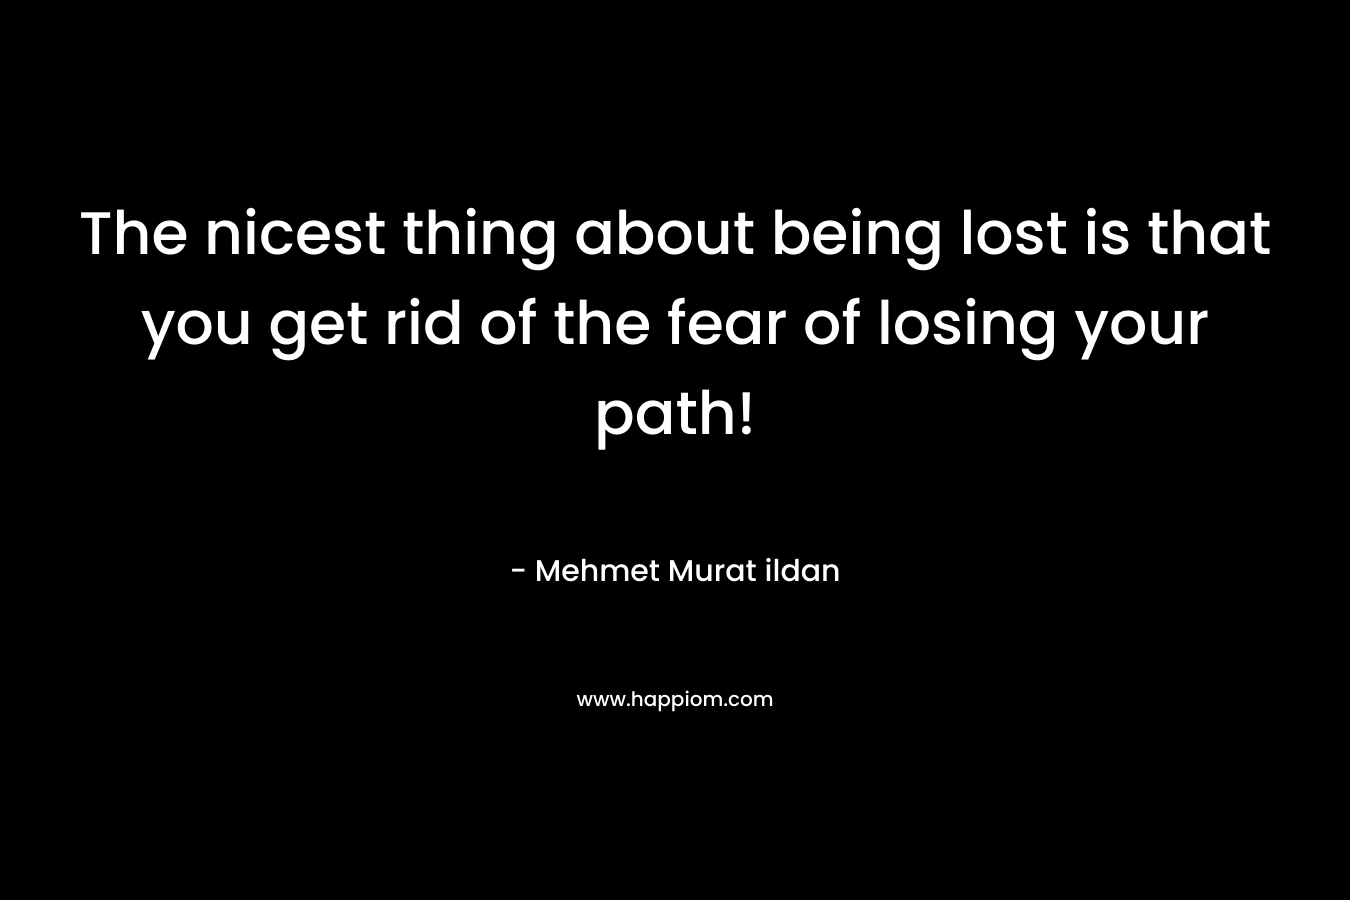 The nicest thing about being lost is that you get rid of the fear of losing your path!